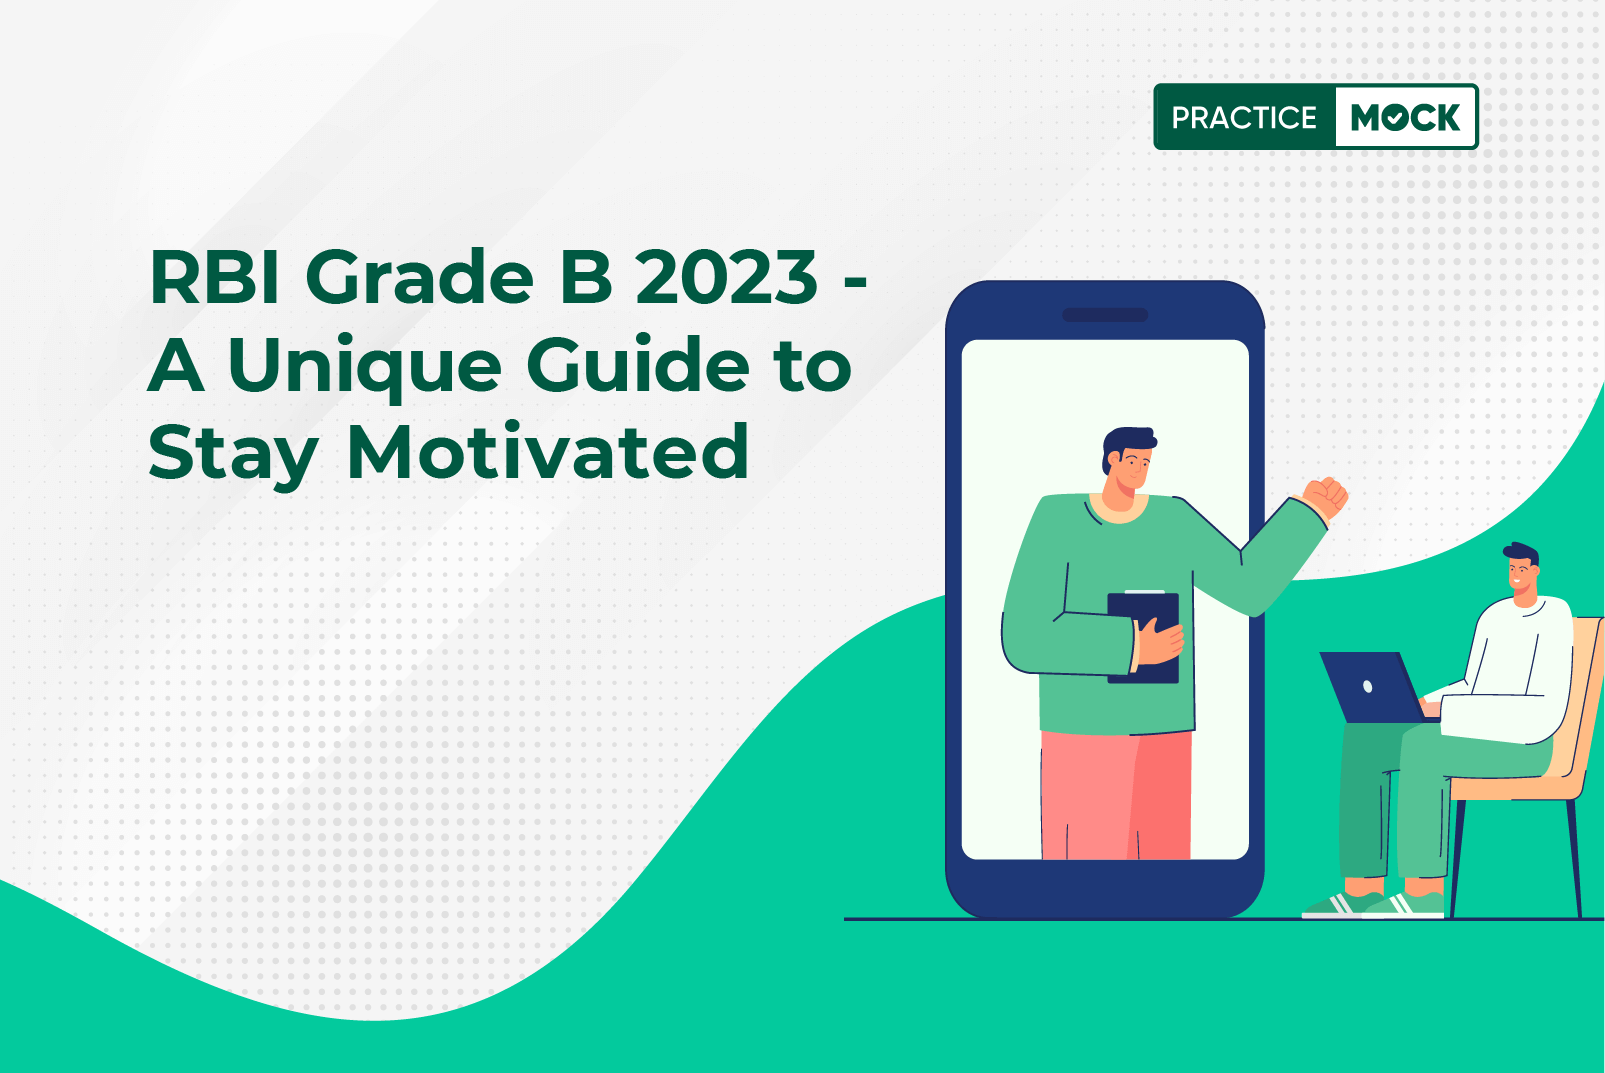 RBI Grade B - A Unique Guide to Stay Motivated